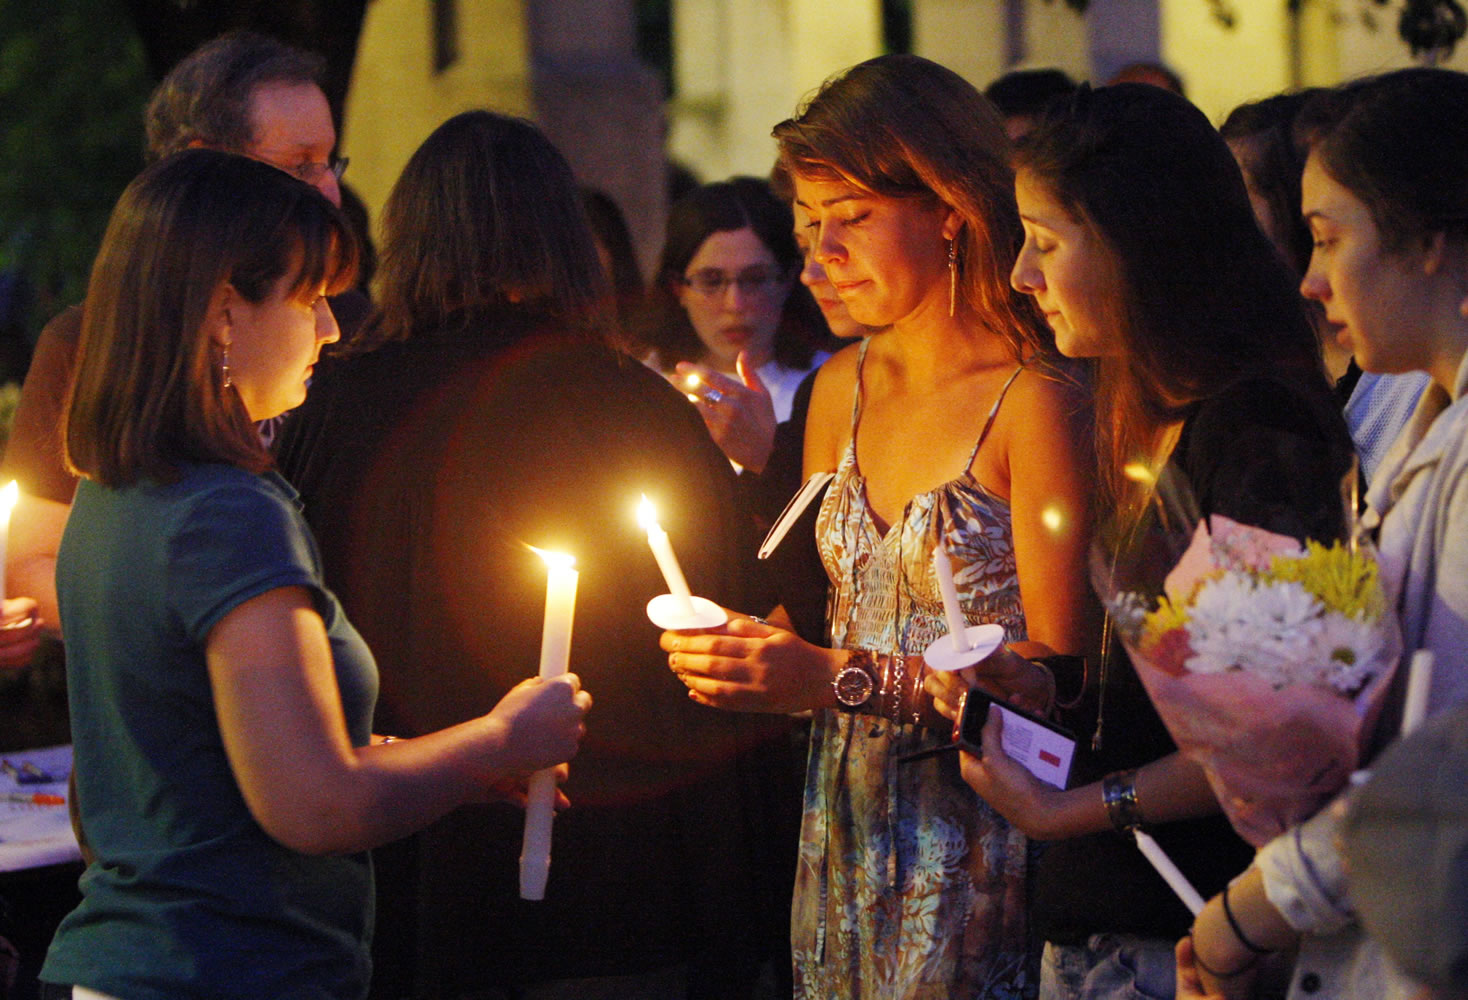 Boston University students including Tori Pinheiro, third right, of New Bedford, Mass., and Austin Brashears' girlfriend, holds a candlelight vigil on Marsh Plaza at Boston University, Saturday, May 12, 2012, in Boston, for three students studying in New Zealand who were killed when their minivan crashed during a weekend trip. Daniela Lekhno, 20, of Manalapan, N.J.; Austin Brashears, 21, of Huntington Beach, Calif.; and Roch Jauberty, 21, whose parents live in Paris, were killed as they traveled in a minivan Saturday near the North Island vacation town of Taupo when the vehicle drifted to the side of the road and then rolled when the driver tried to correct course.